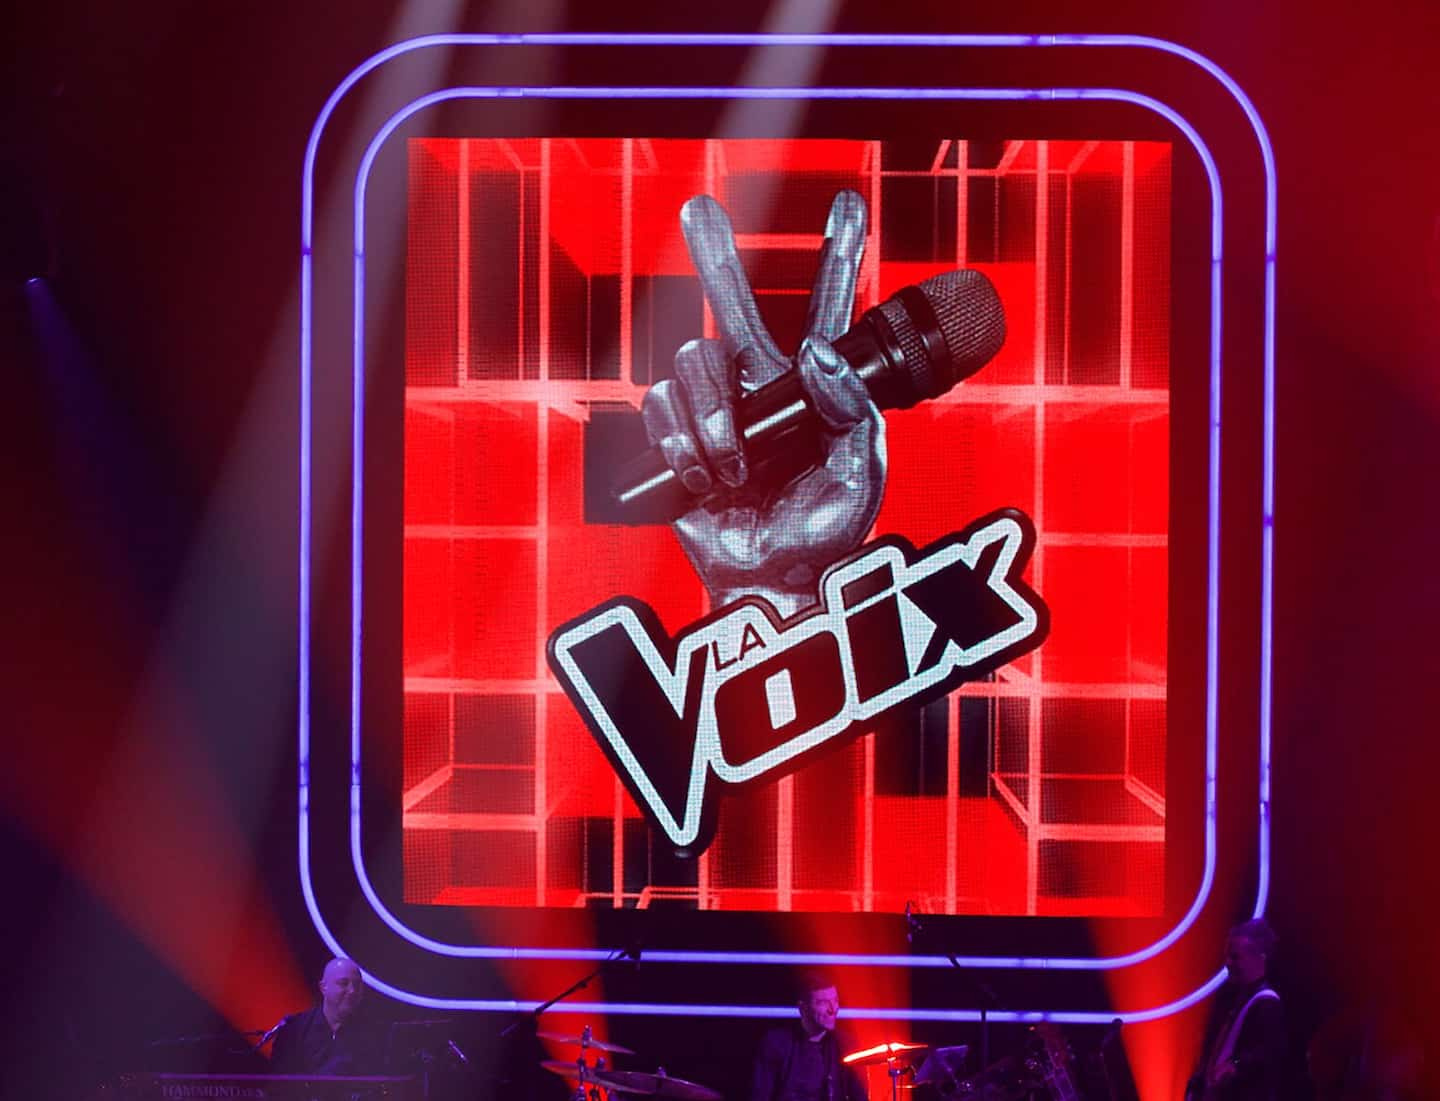 Pre-auditions of “La Voix”: extras added in Montreal